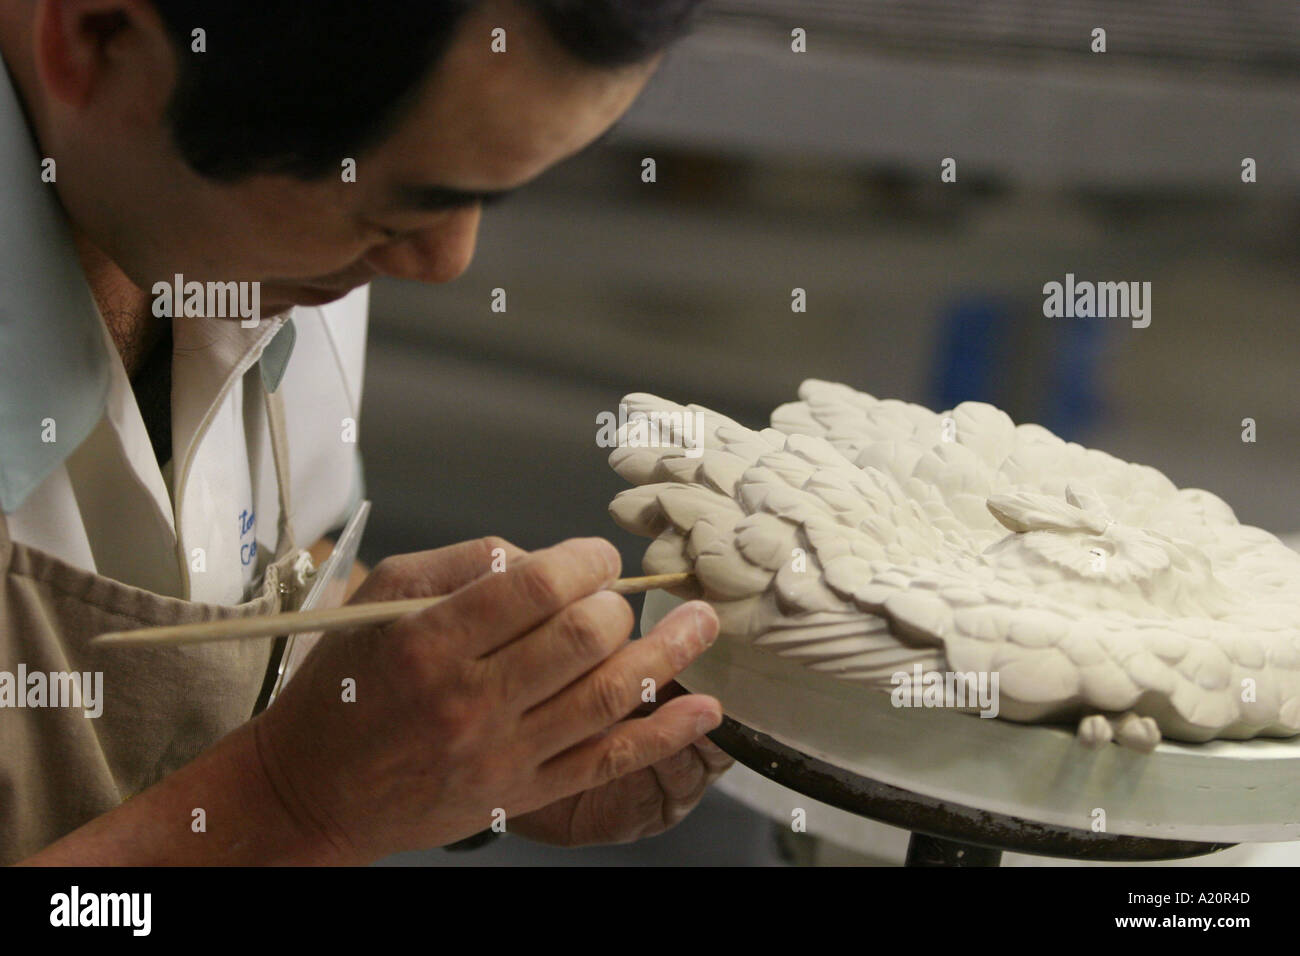 A craftsman at work sculpting a bird shaped piece of work within the Noritake China factory, Nagoya, Japan Stock Photo